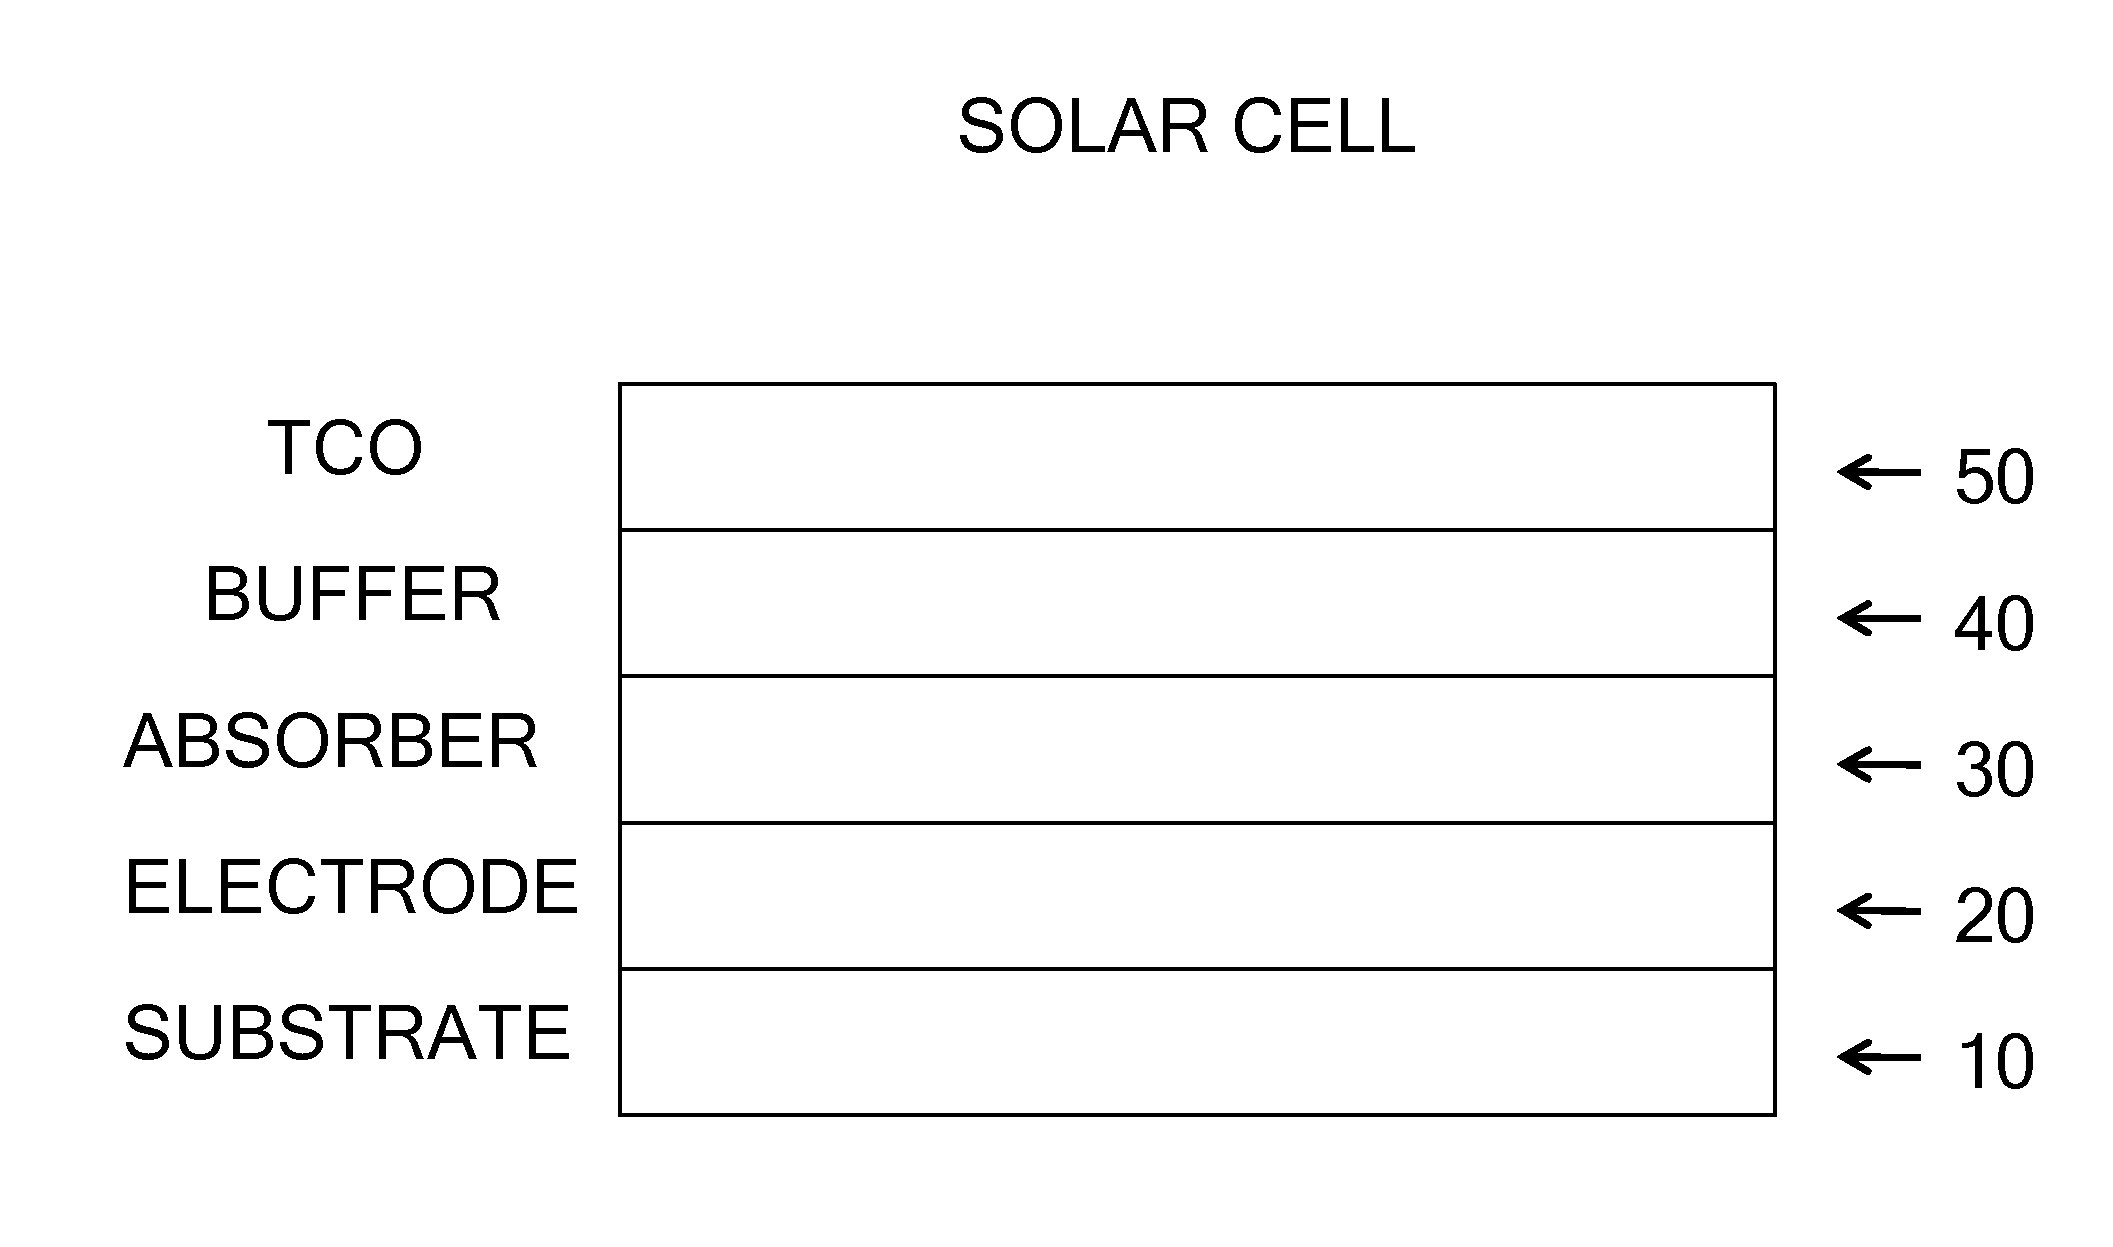 Deposition processes and photovoltaic devices with polymeric precursors